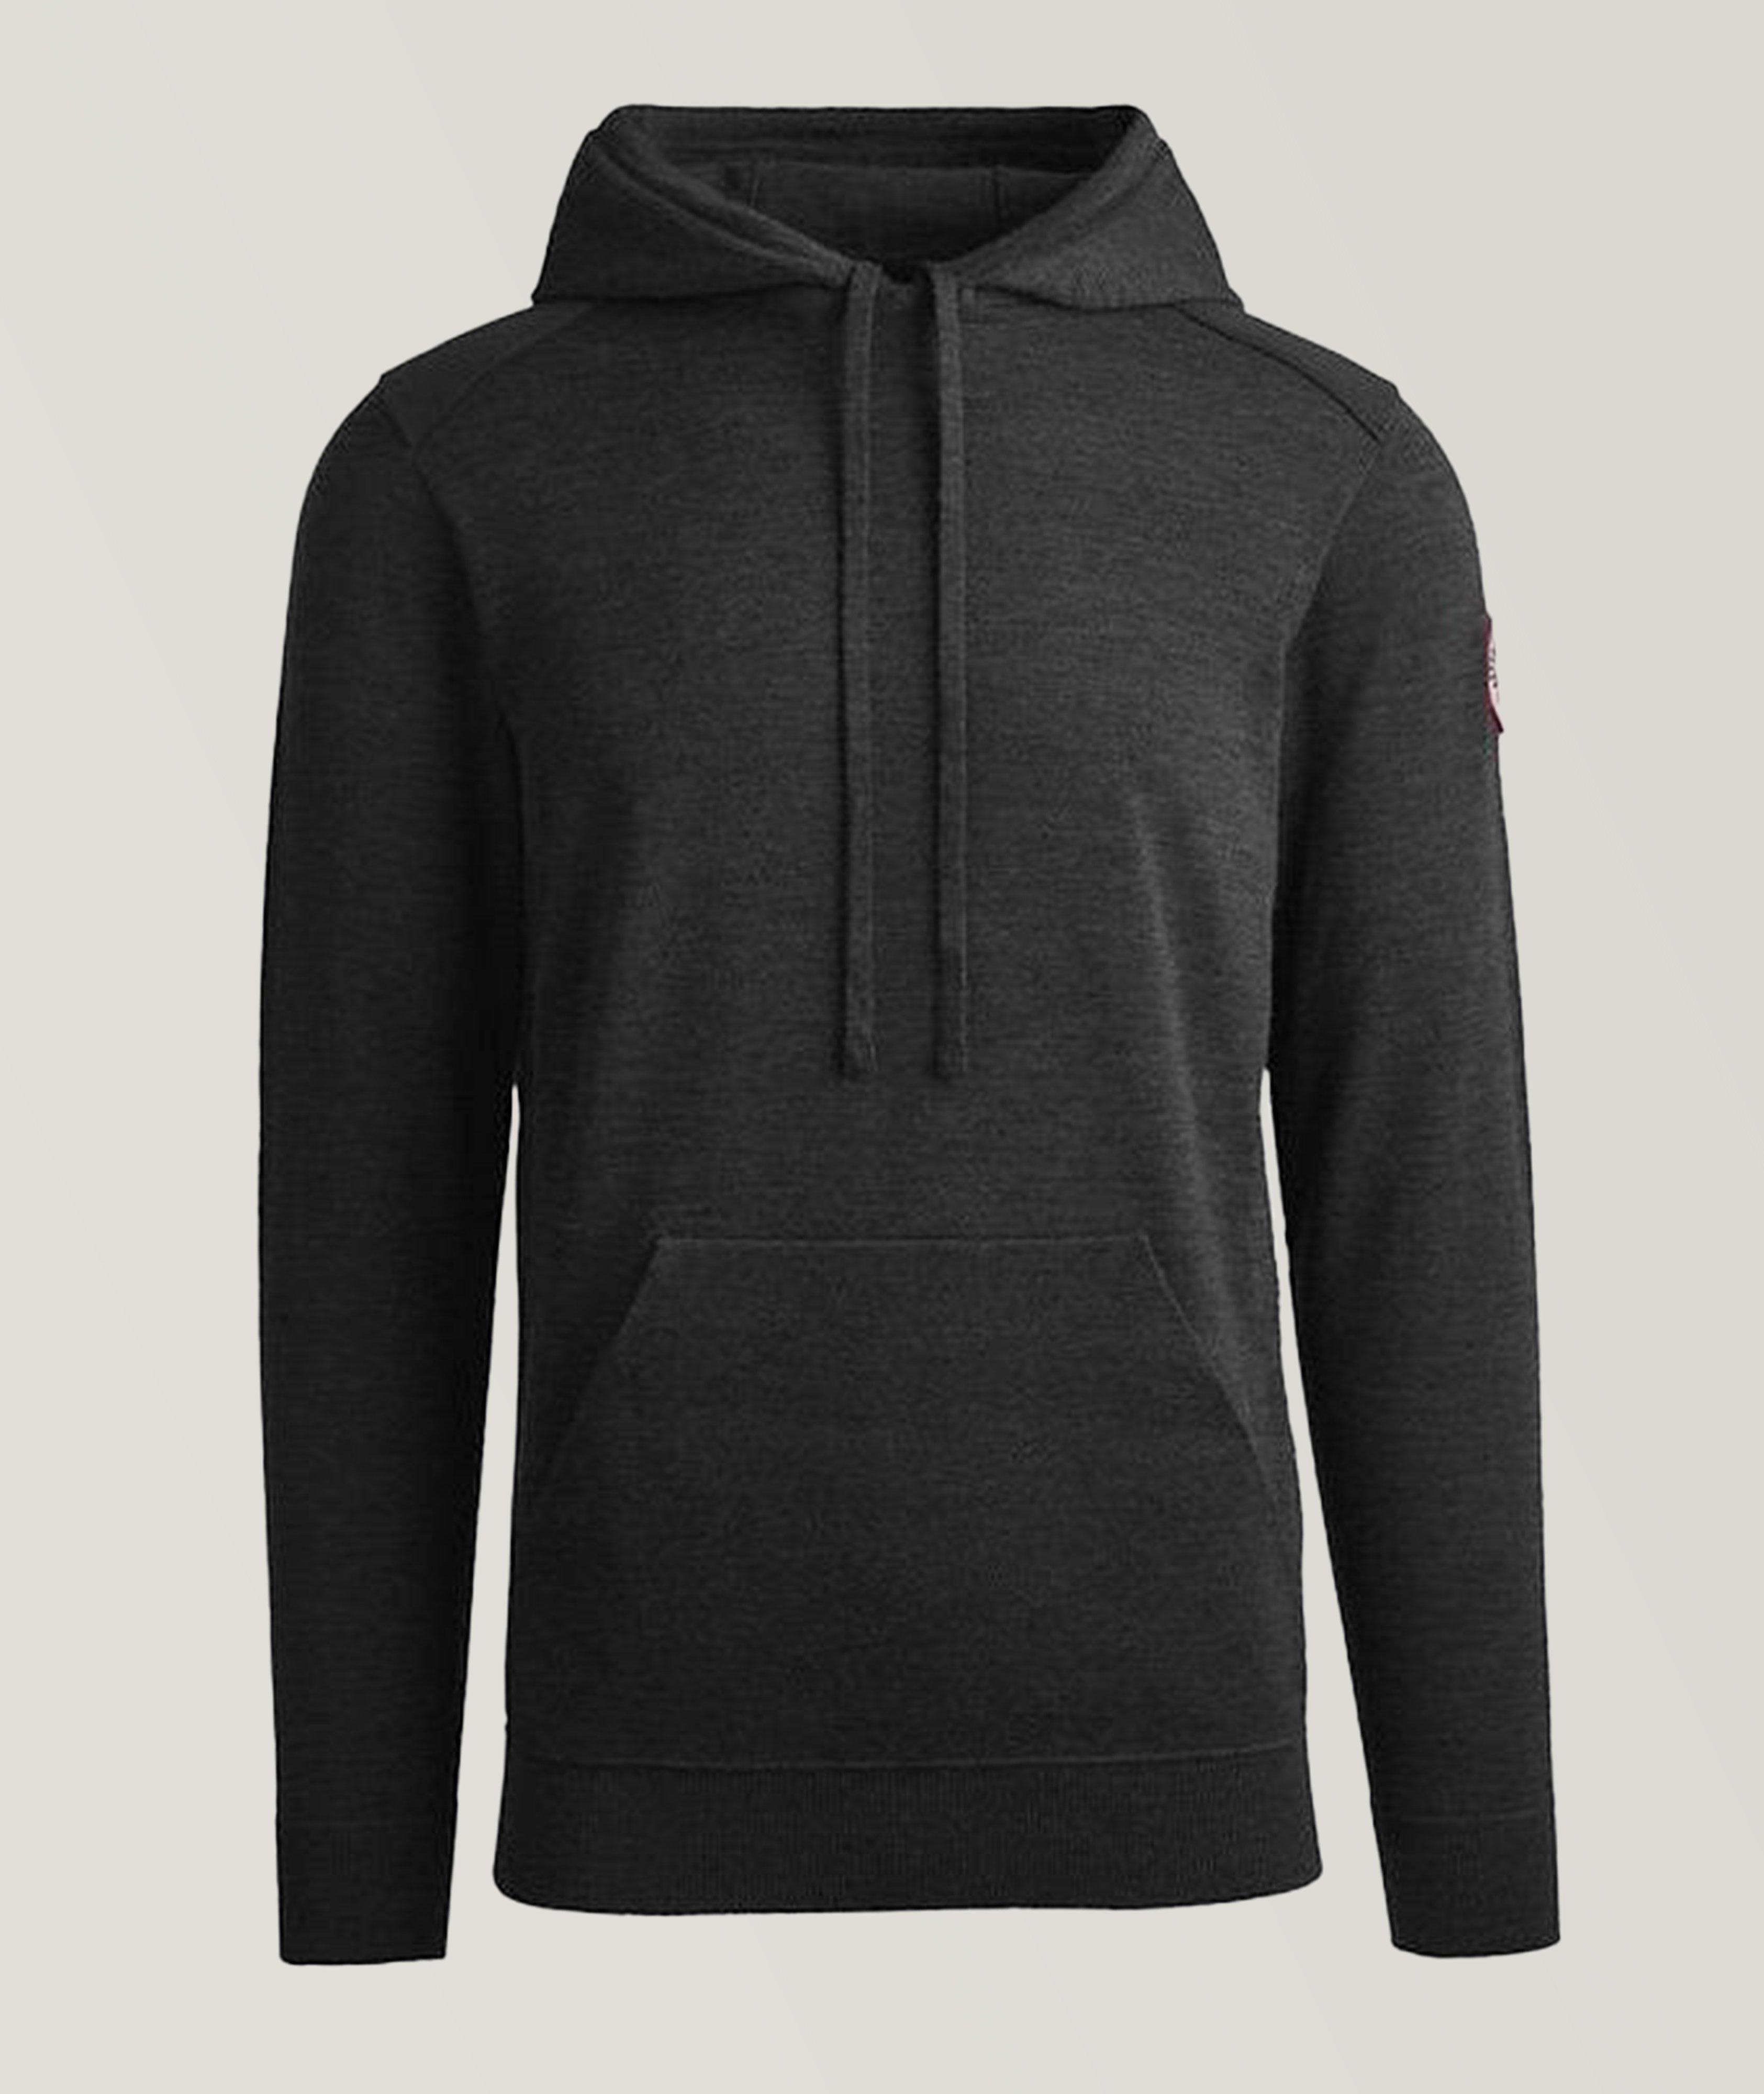 Amherst Hooded Sweater image 0